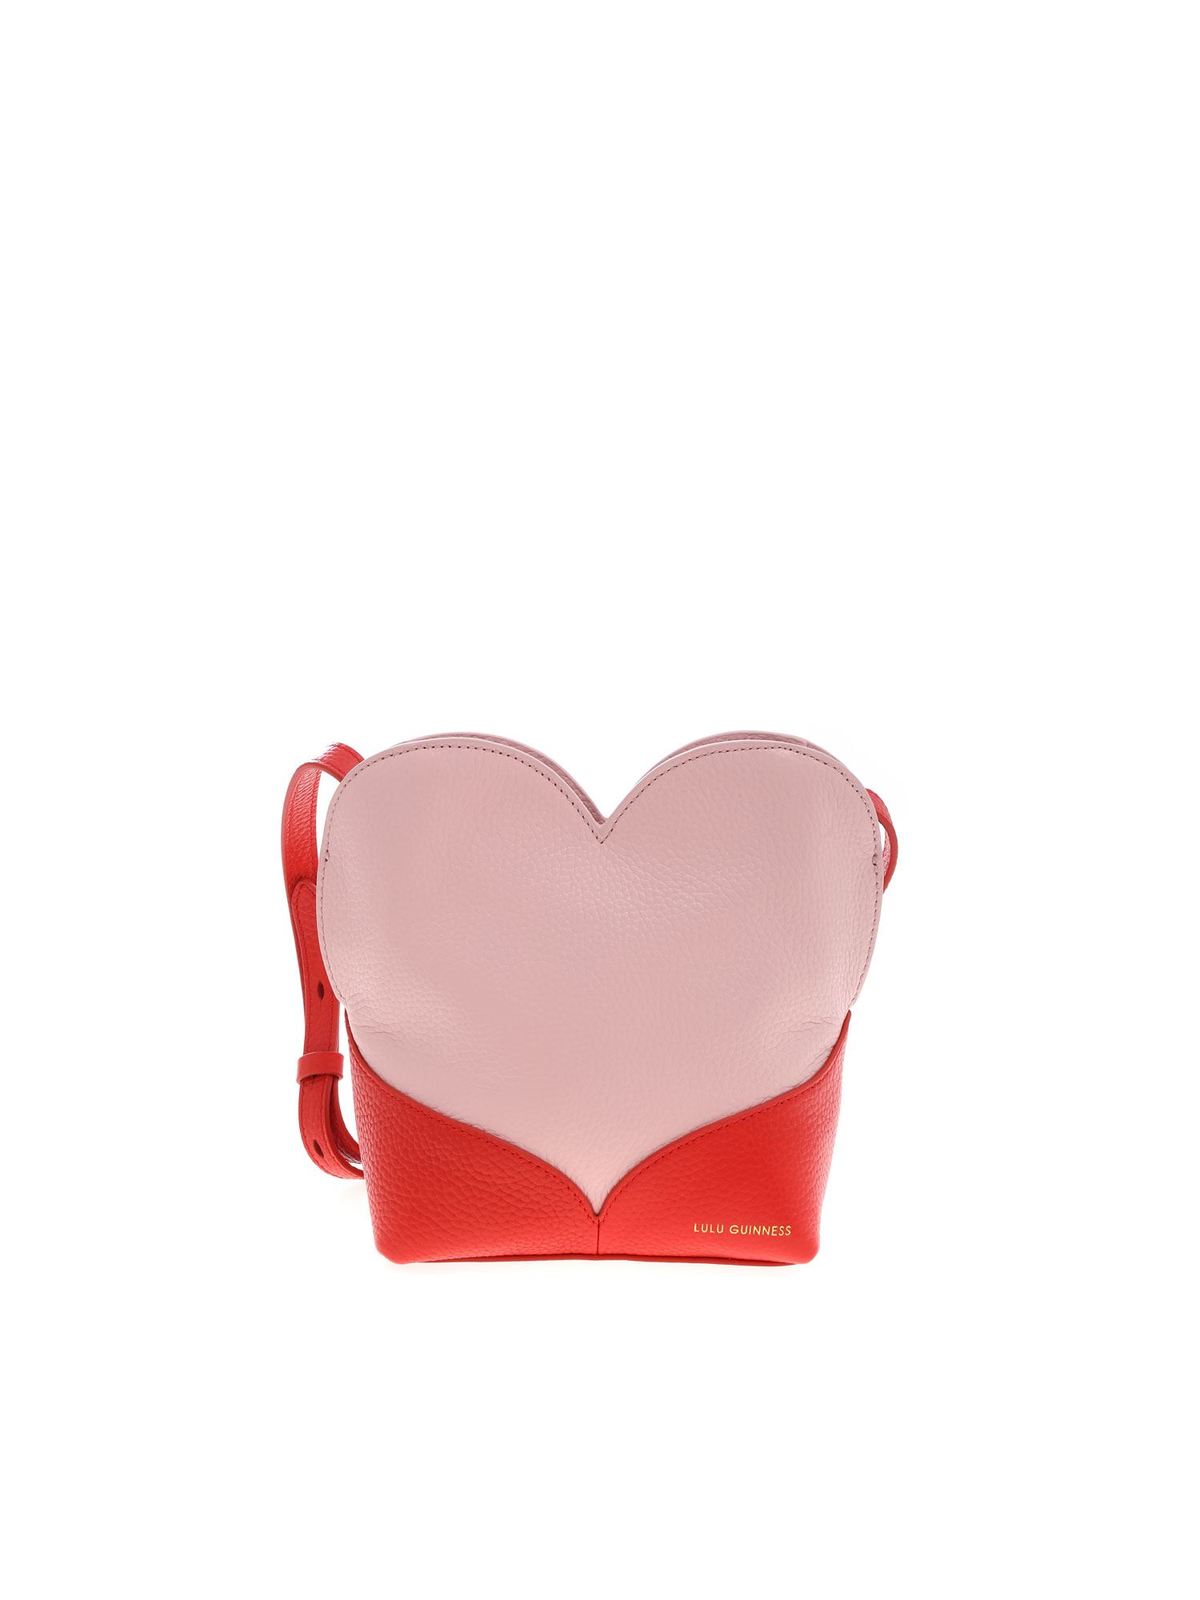 LULU GUINNESS HARRIET BAG IN PINK AND RED